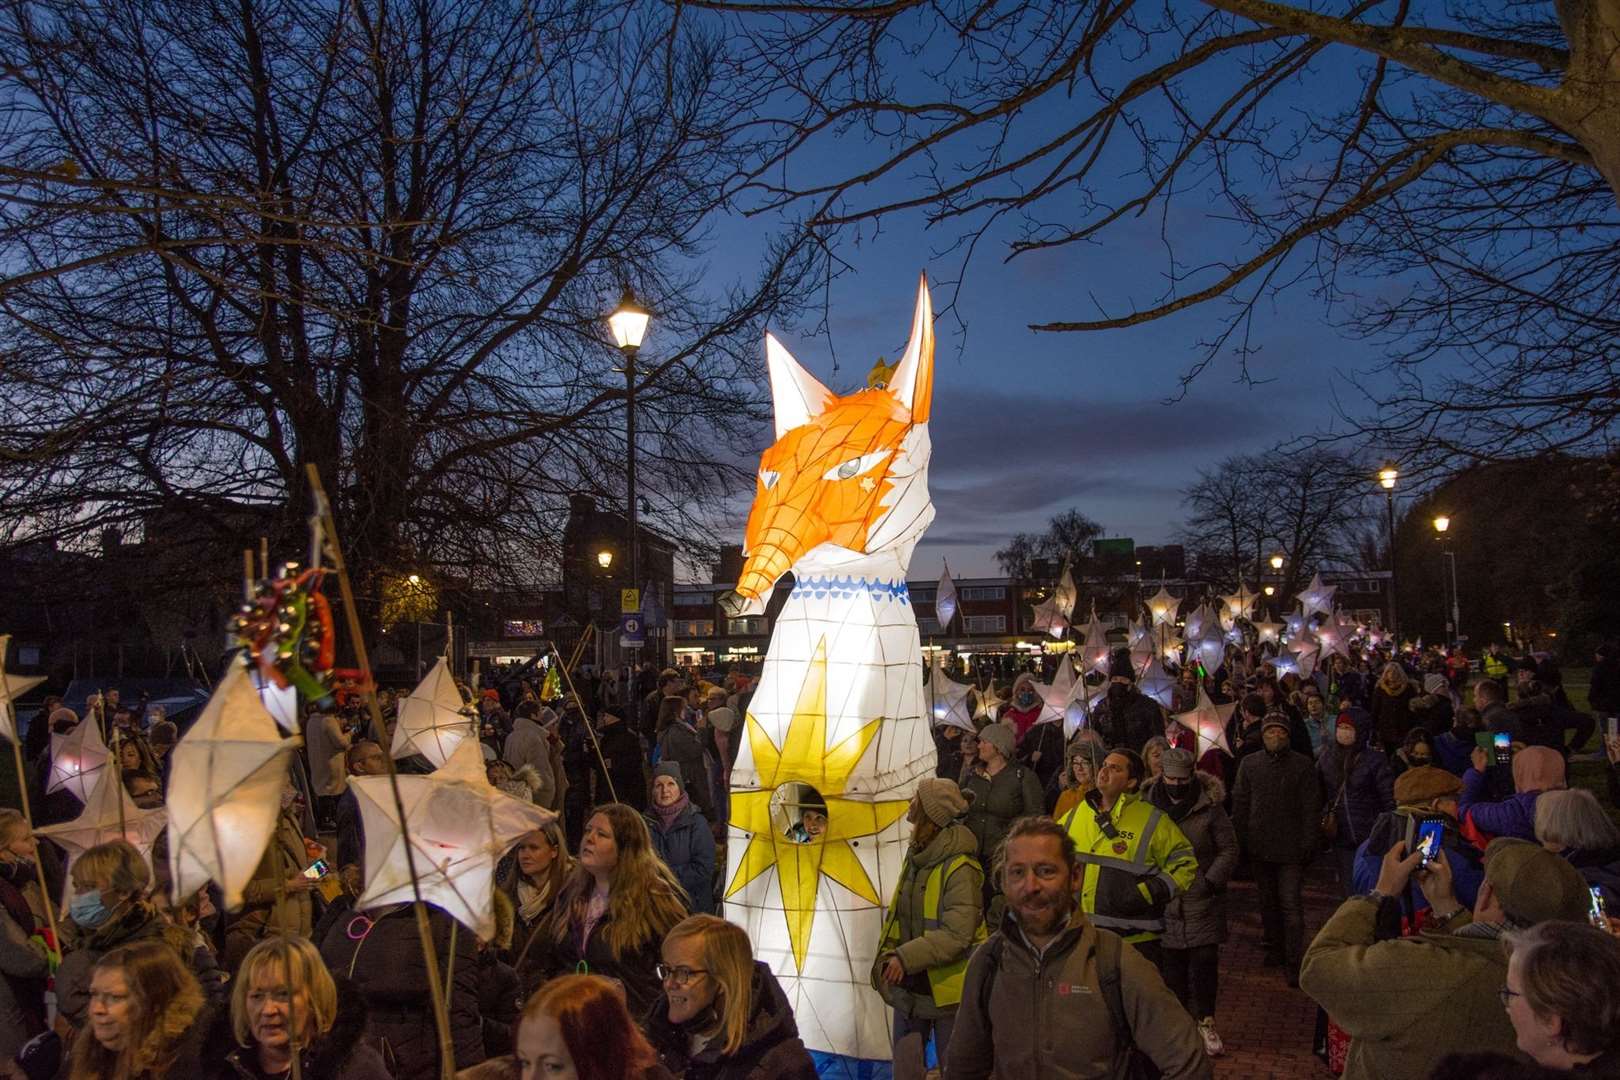 The parade at Pencester Gardens with the fox figure. Picture: Brian van der Veen